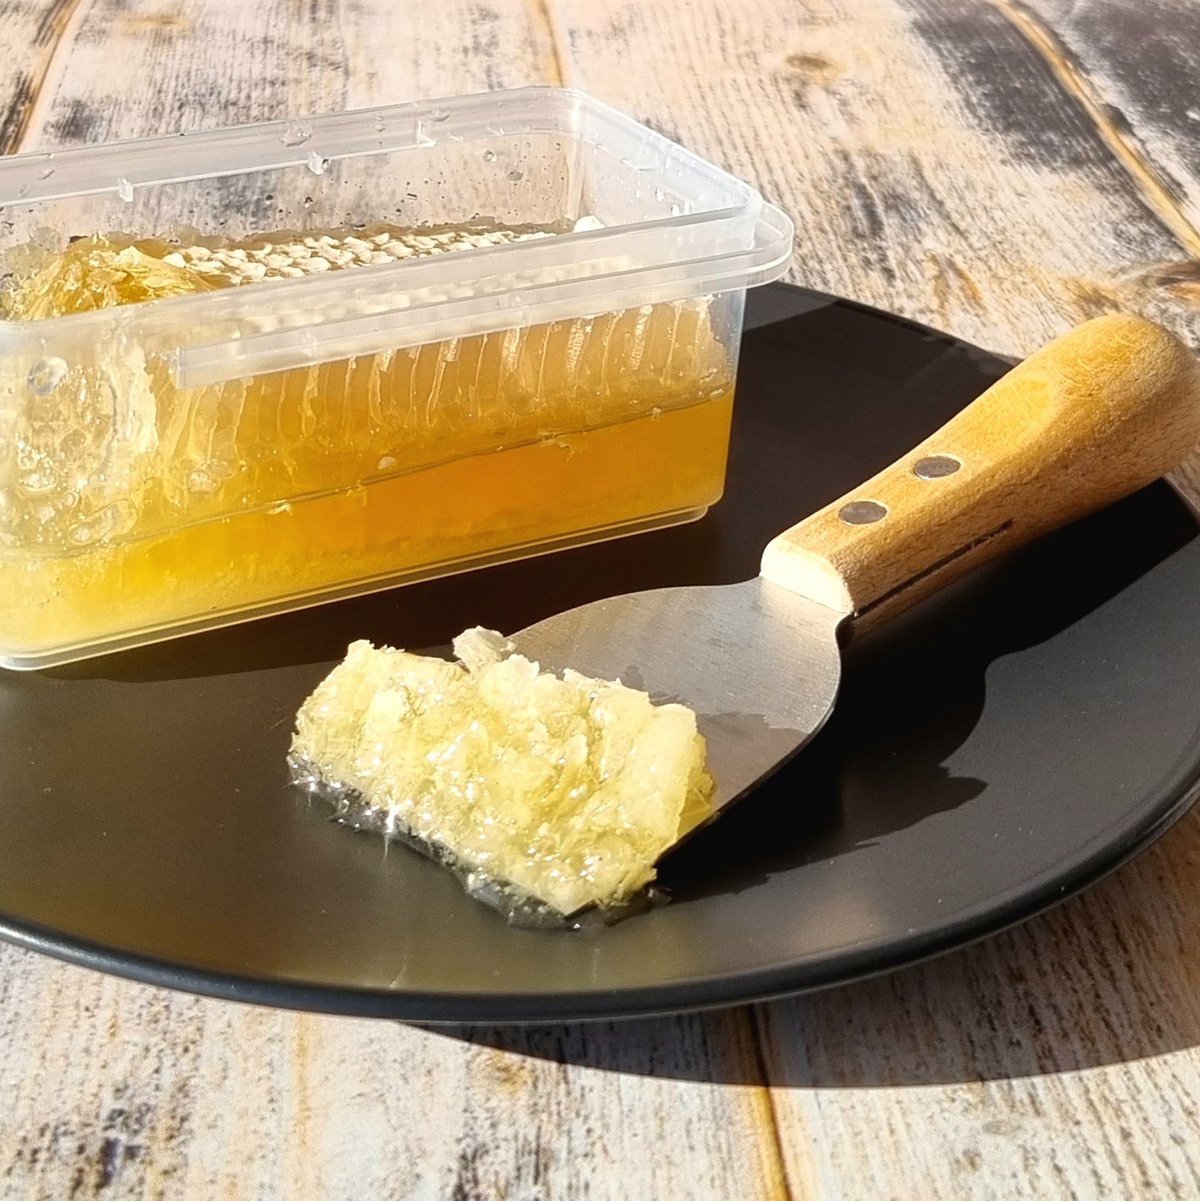 Can you eat it? The Many Health Benefits of Eating Raw Honeycomb — My Dad's  Honey Echuca - Australian Certified Organic Honey